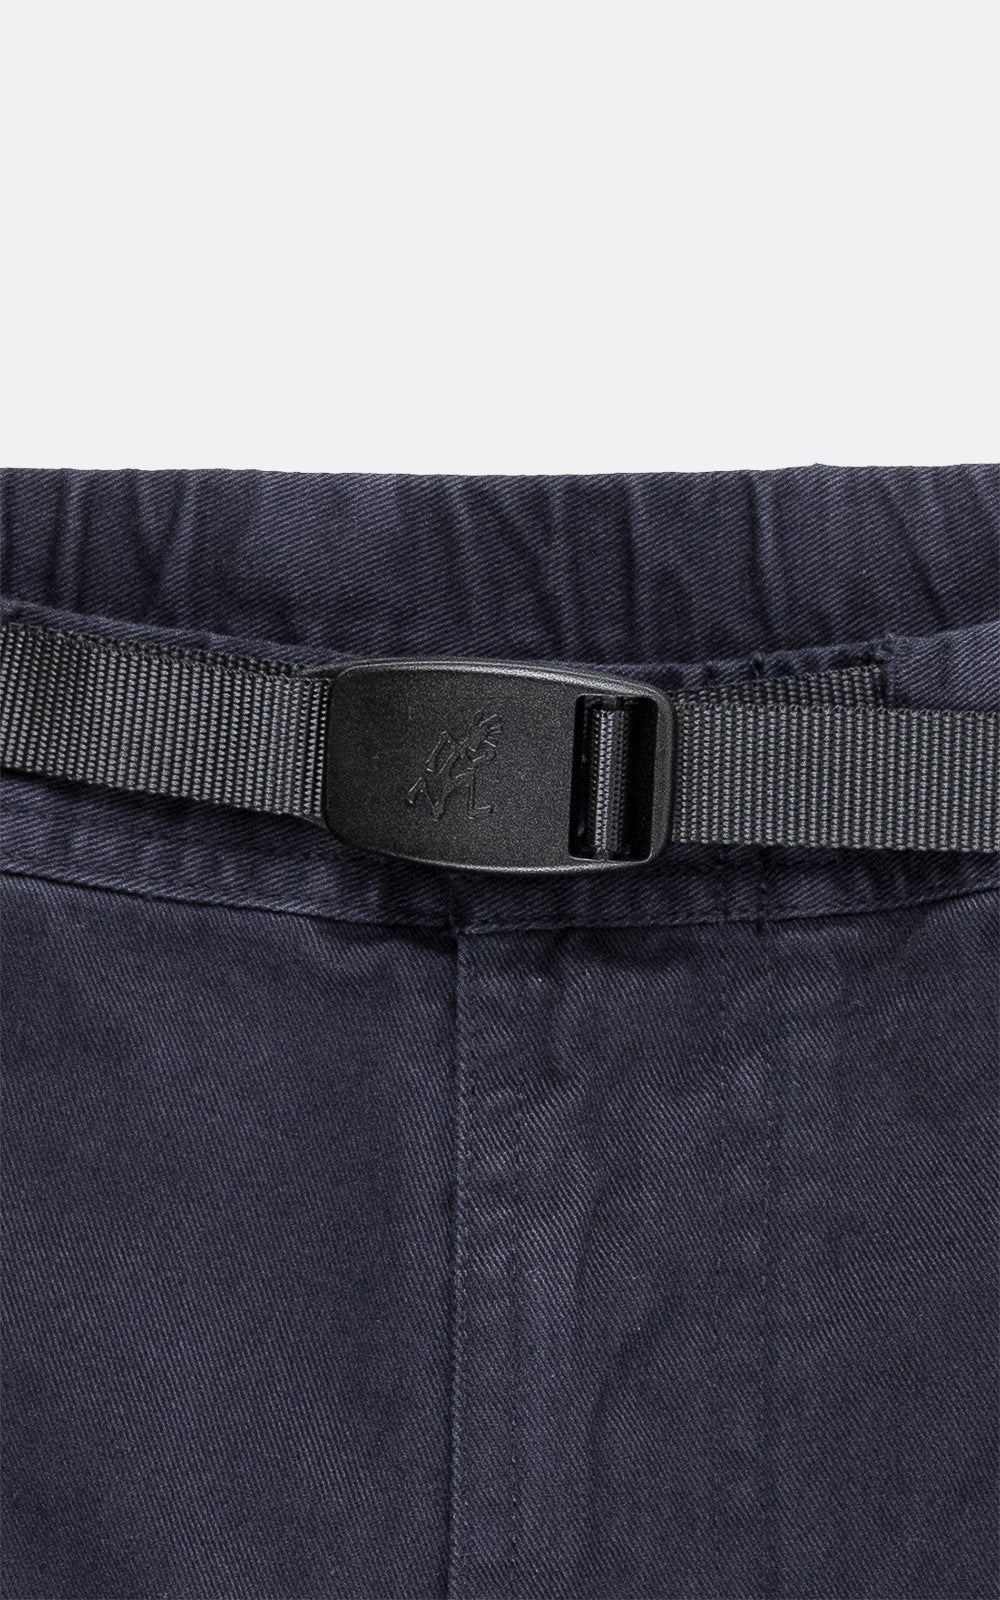 VOYAGER PANT DOUBLE NAVY